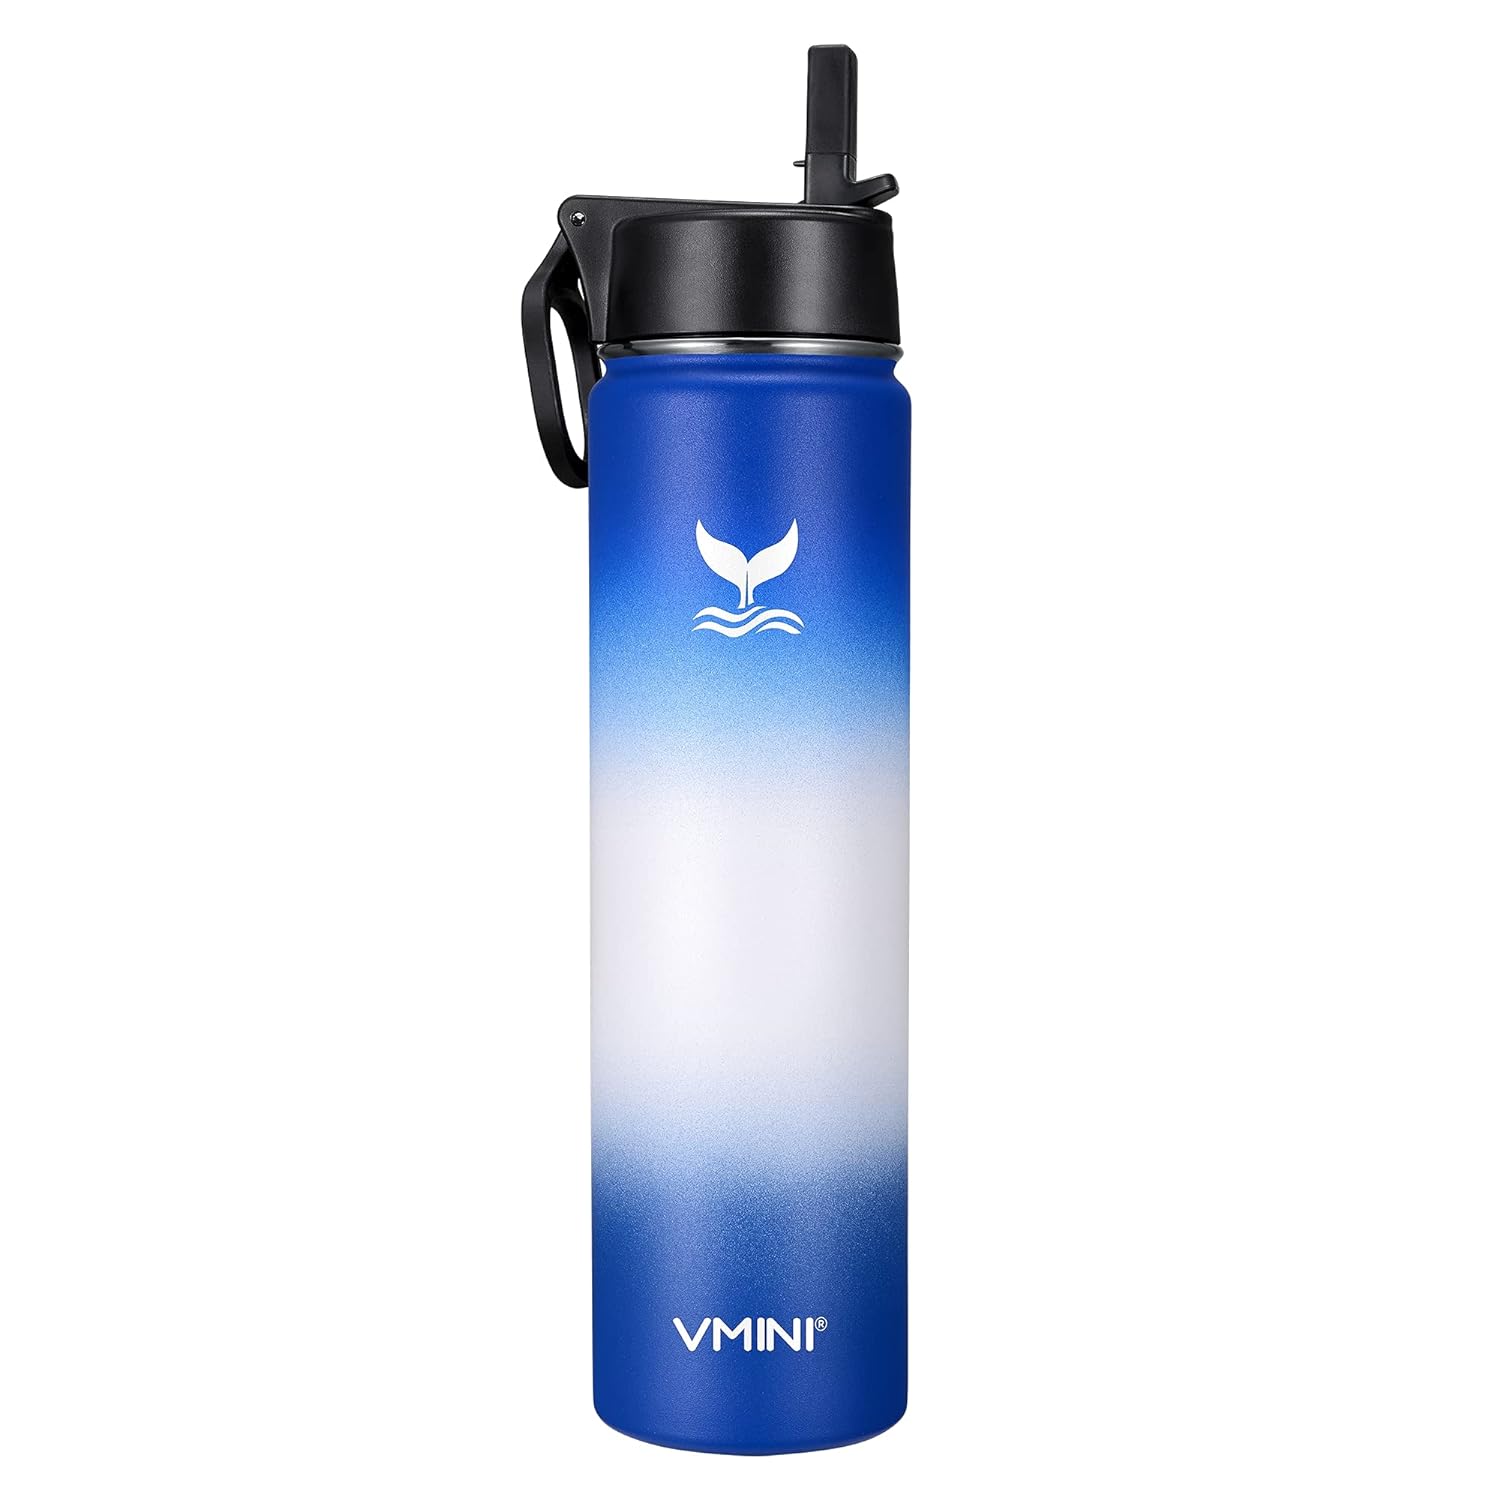 Vmini Water Bottle with Straw, Wide Rotating Handle Straw Lid, Wide Mouth Vacuum Insulated Stainless Steel Water Bottle, Gradient Blue+White+Blue, 24 oz